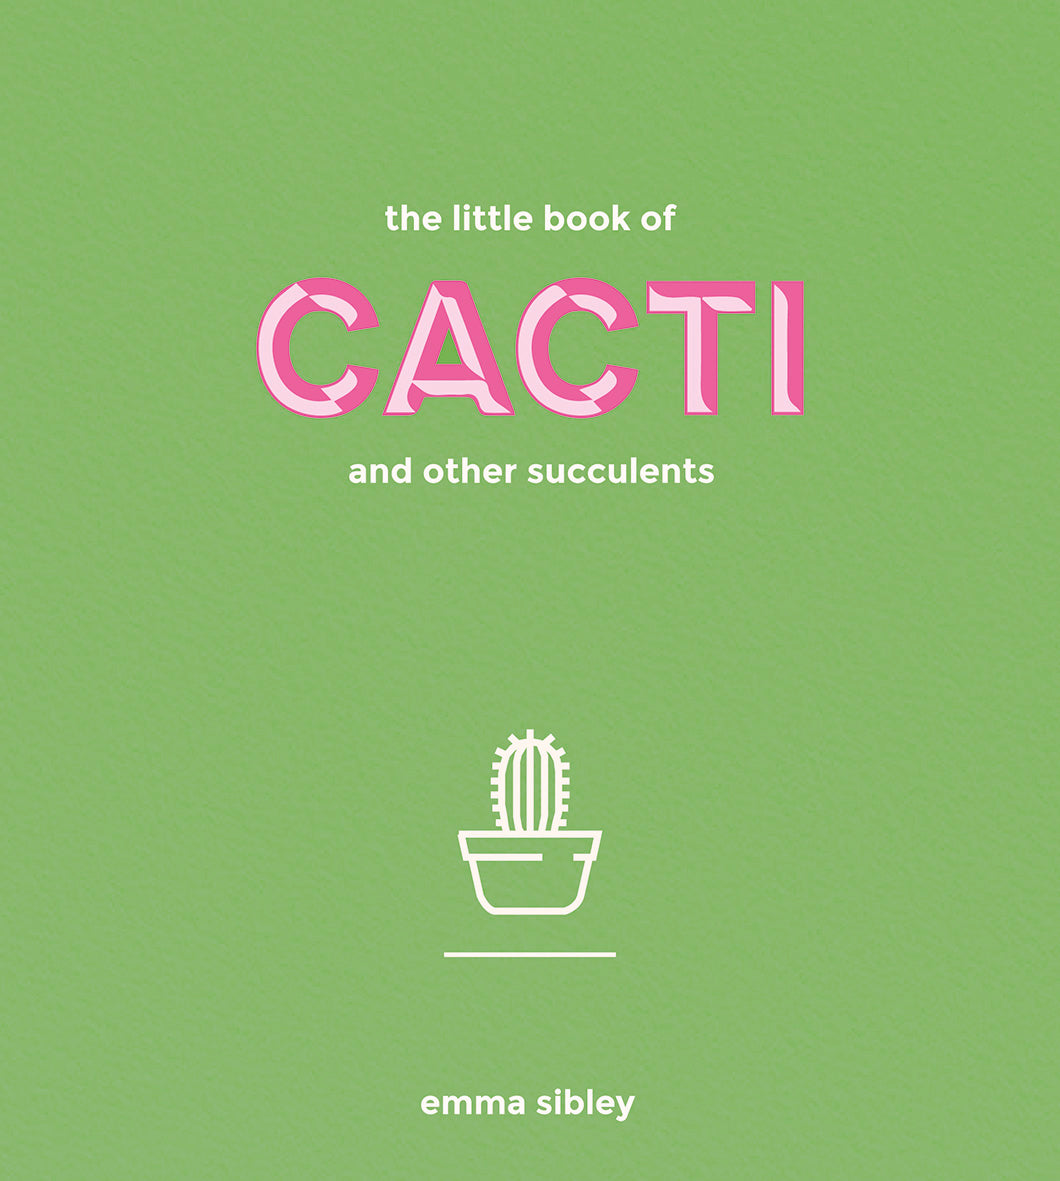 The Little Book of Cacti